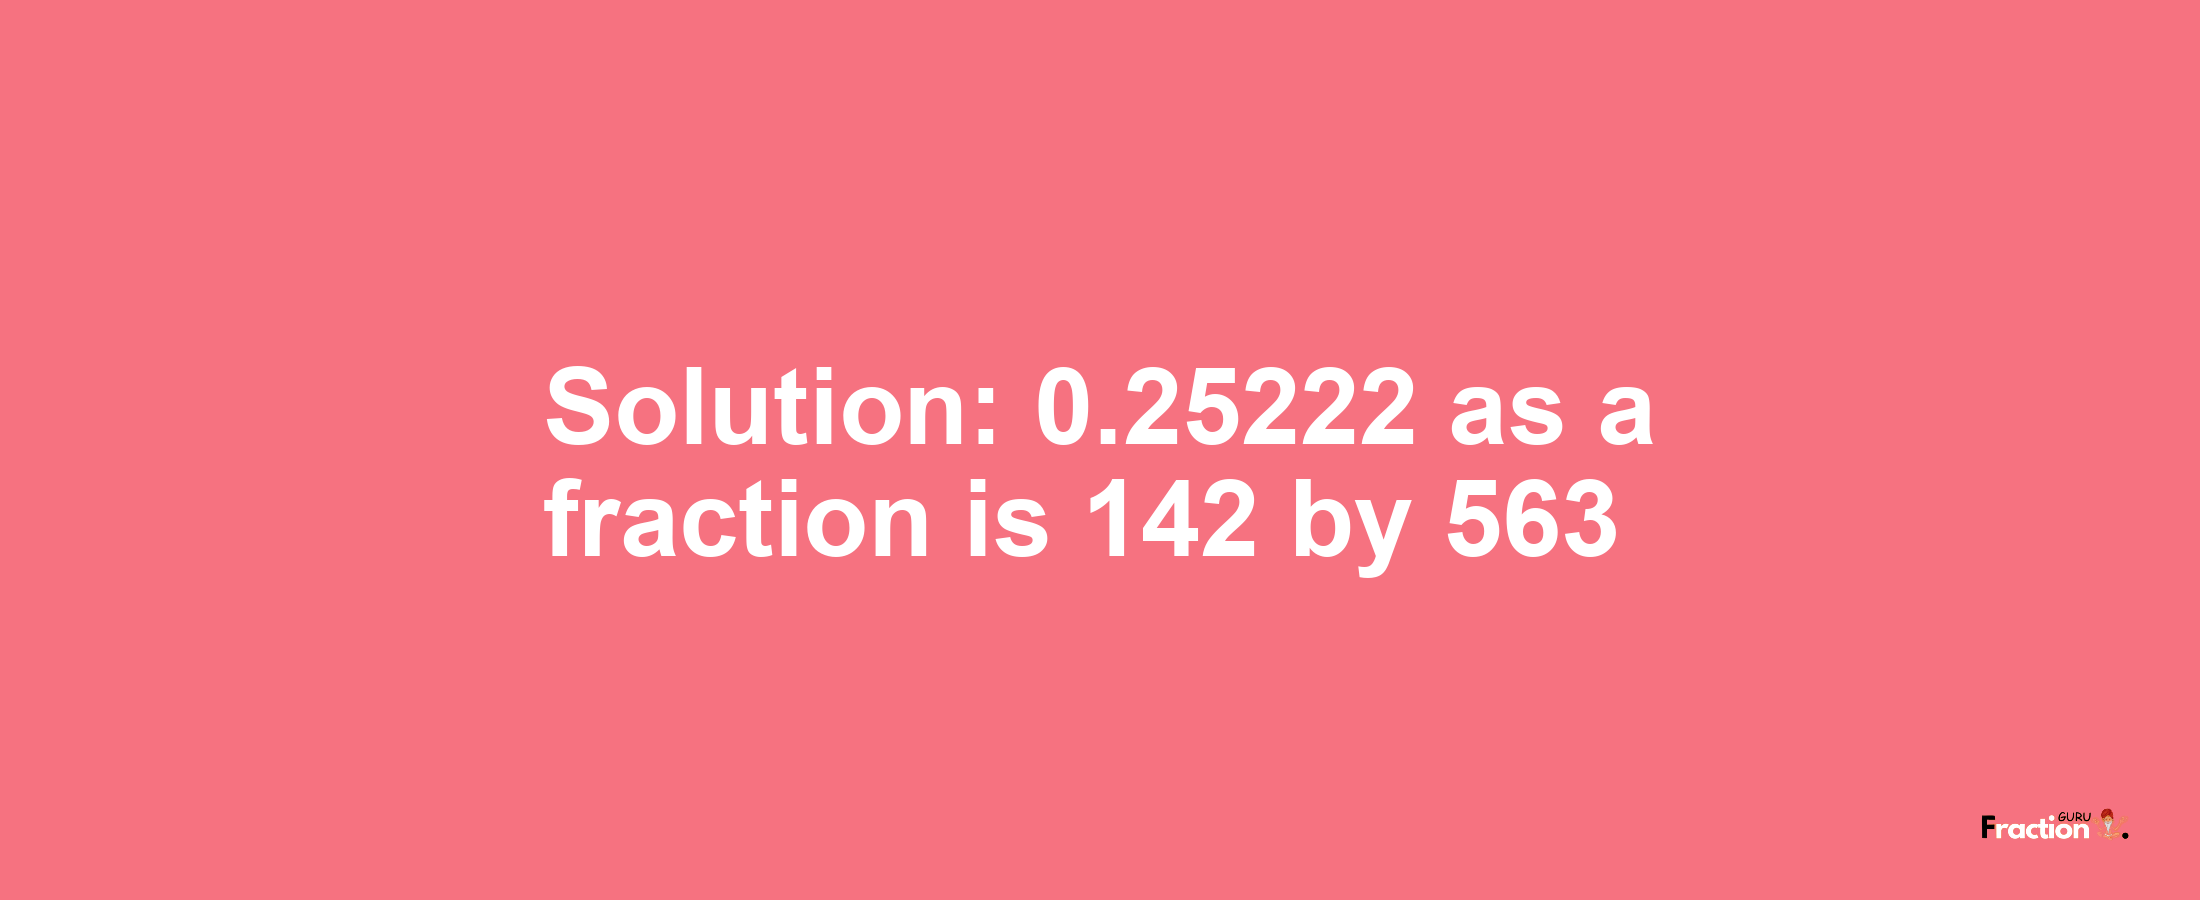 Solution:0.25222 as a fraction is 142/563